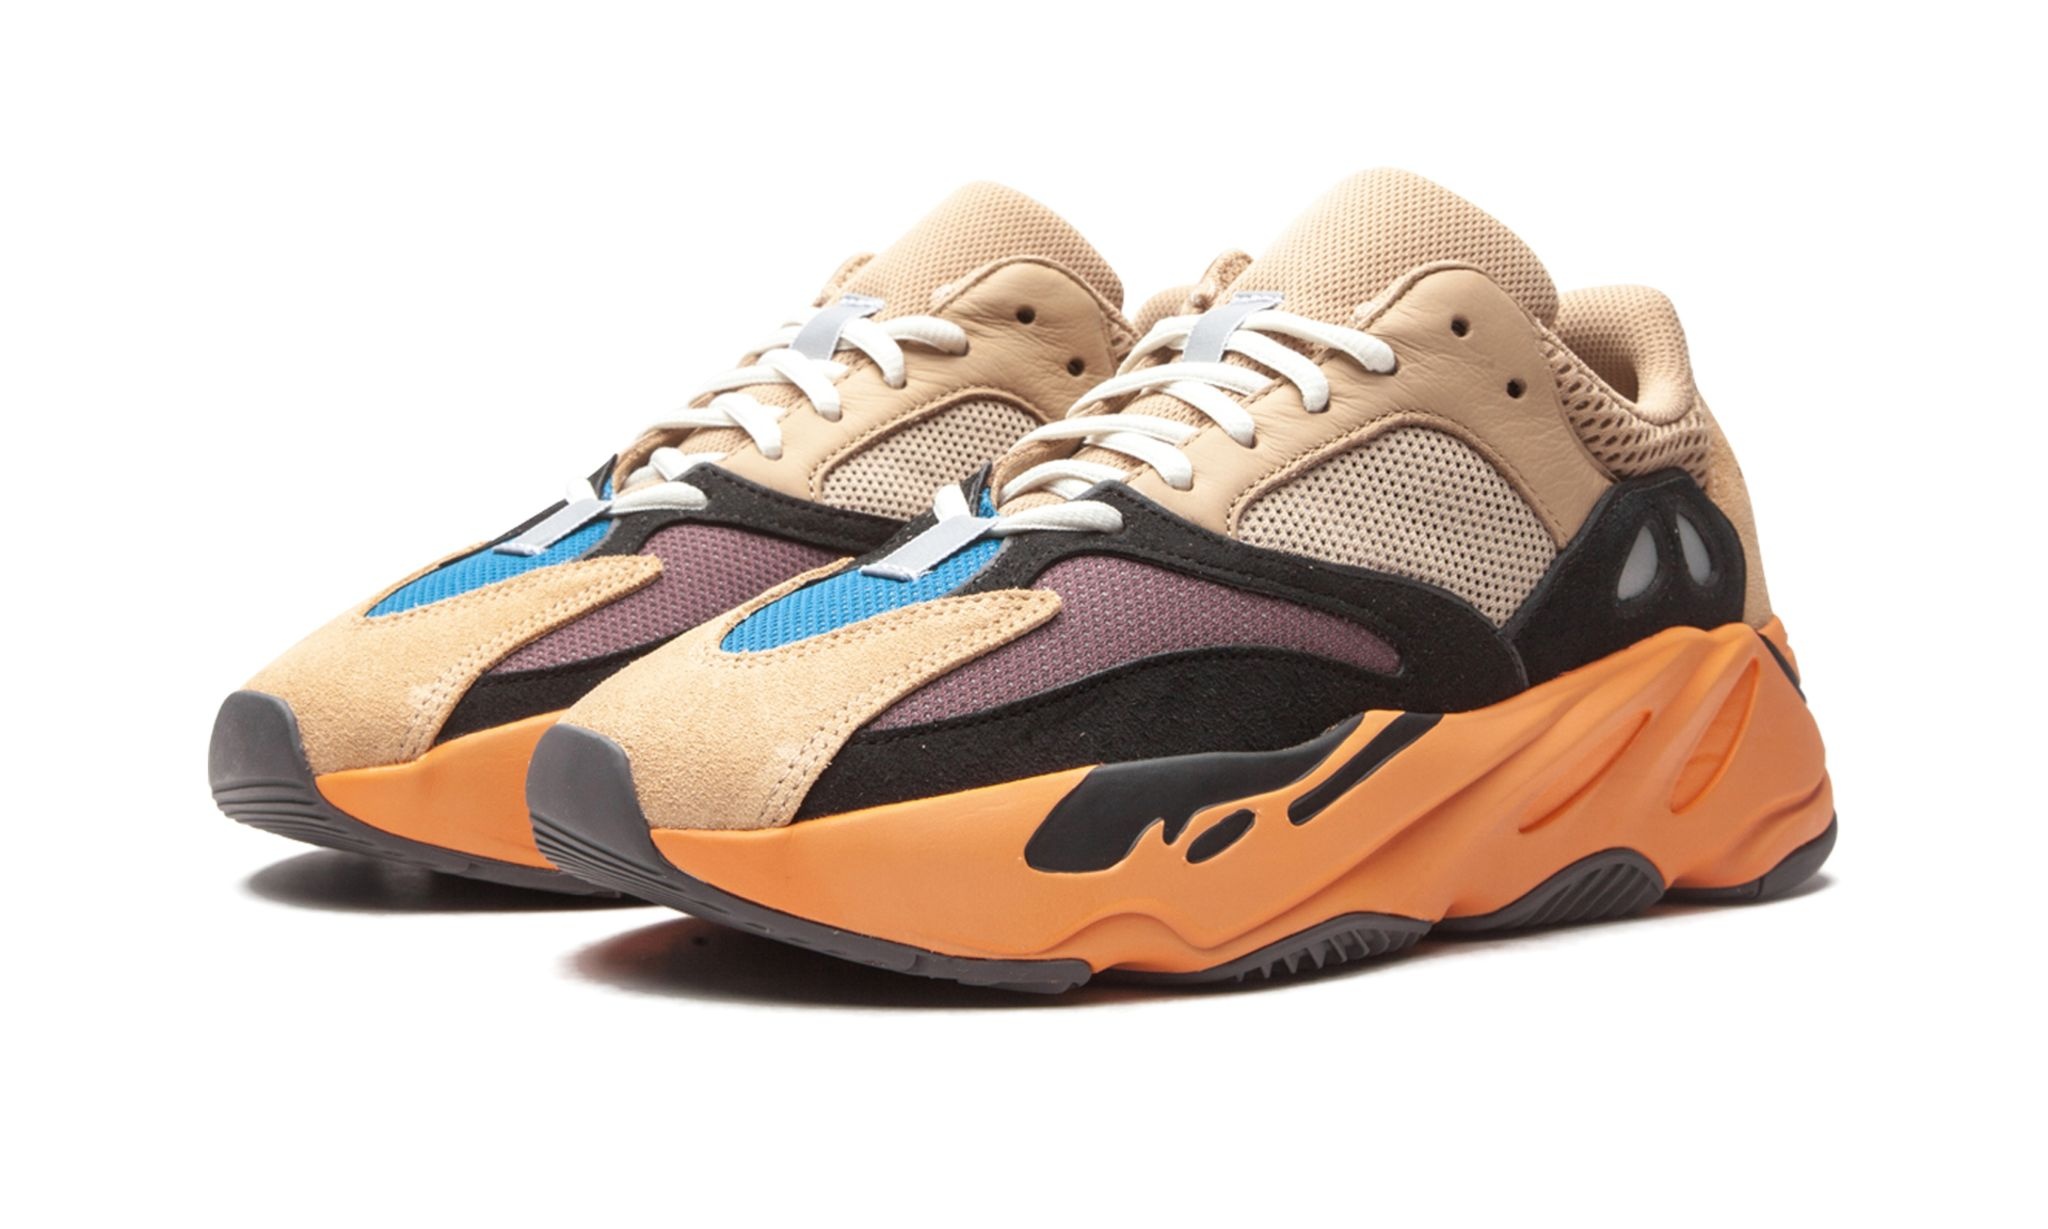 Yeezy Boost 700 "Enflame Amber" - 2